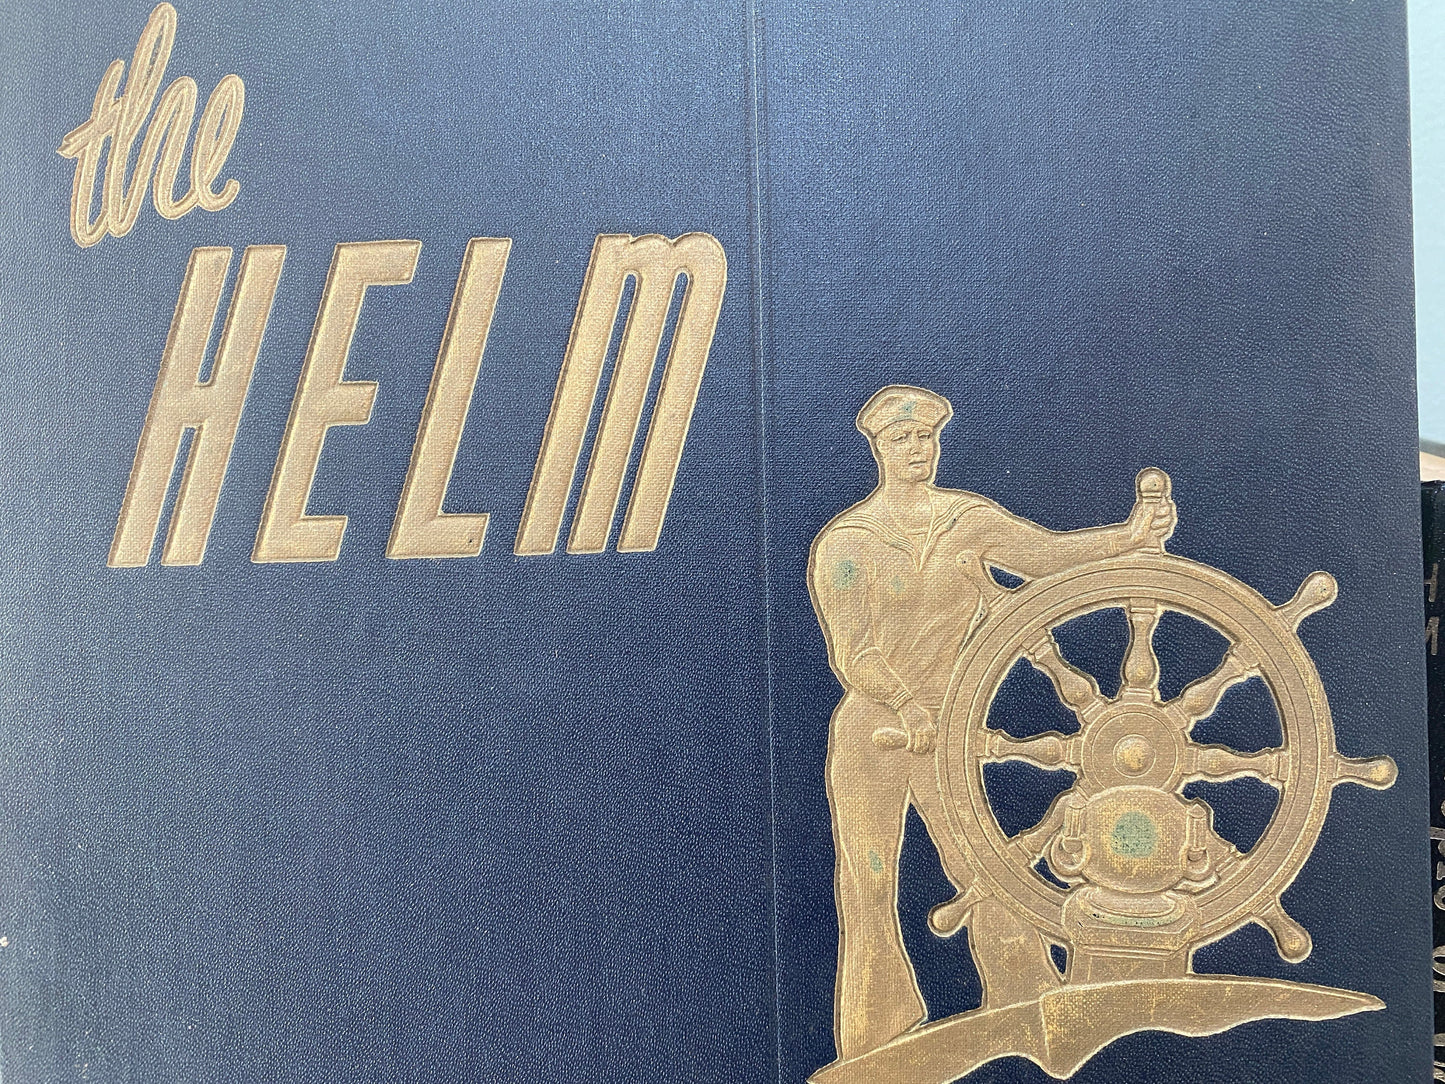 Vintage Book, The Helm, 1951 United States Naval Training Station